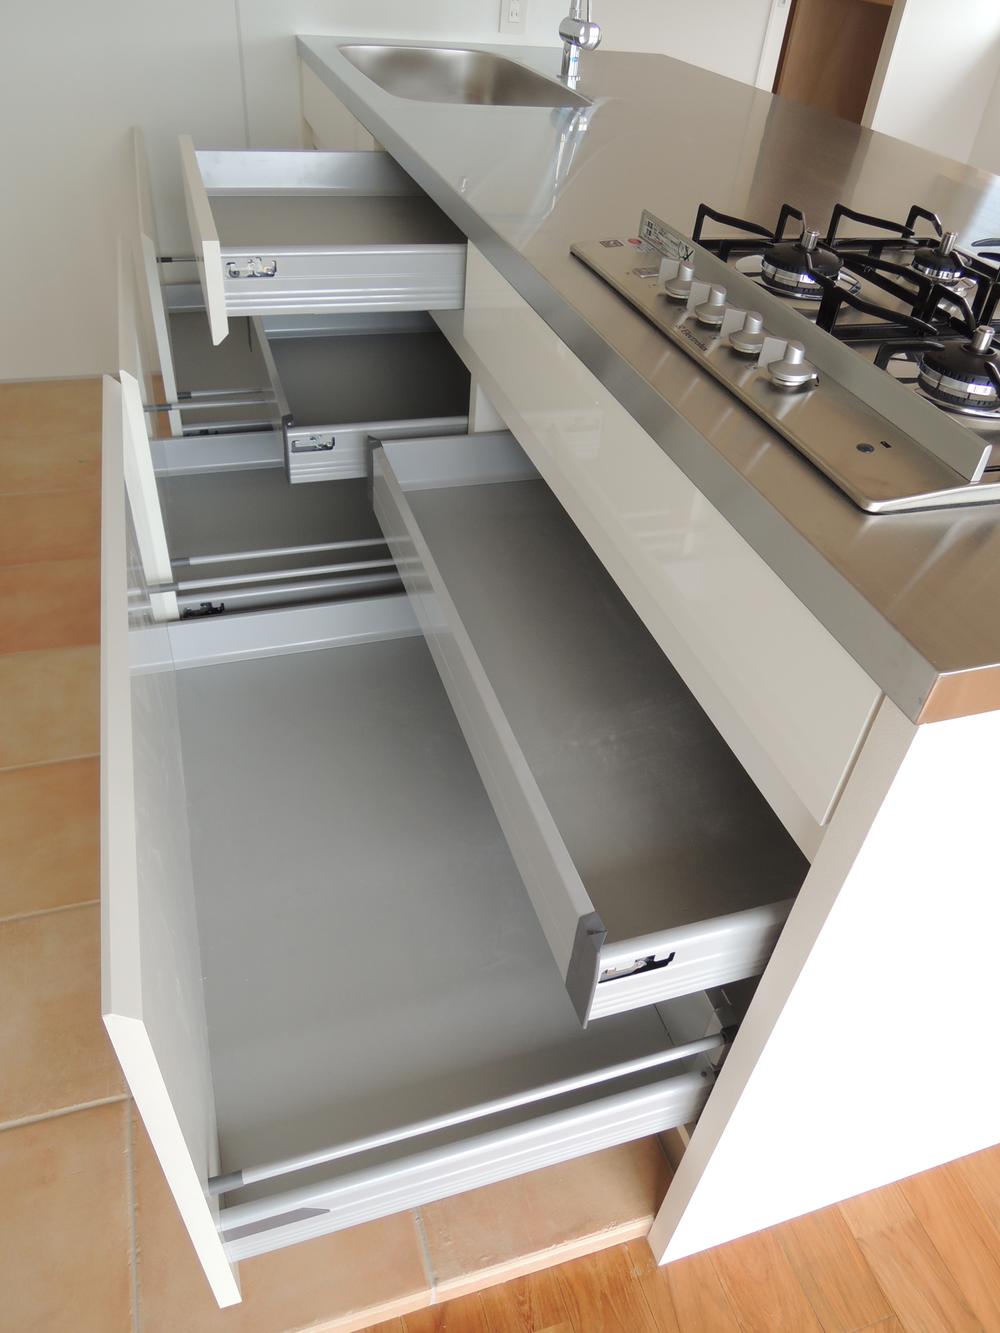 Other Equipment. Drawer of the kitchen uses Blum's slide rail, Quiet and smooth movement.